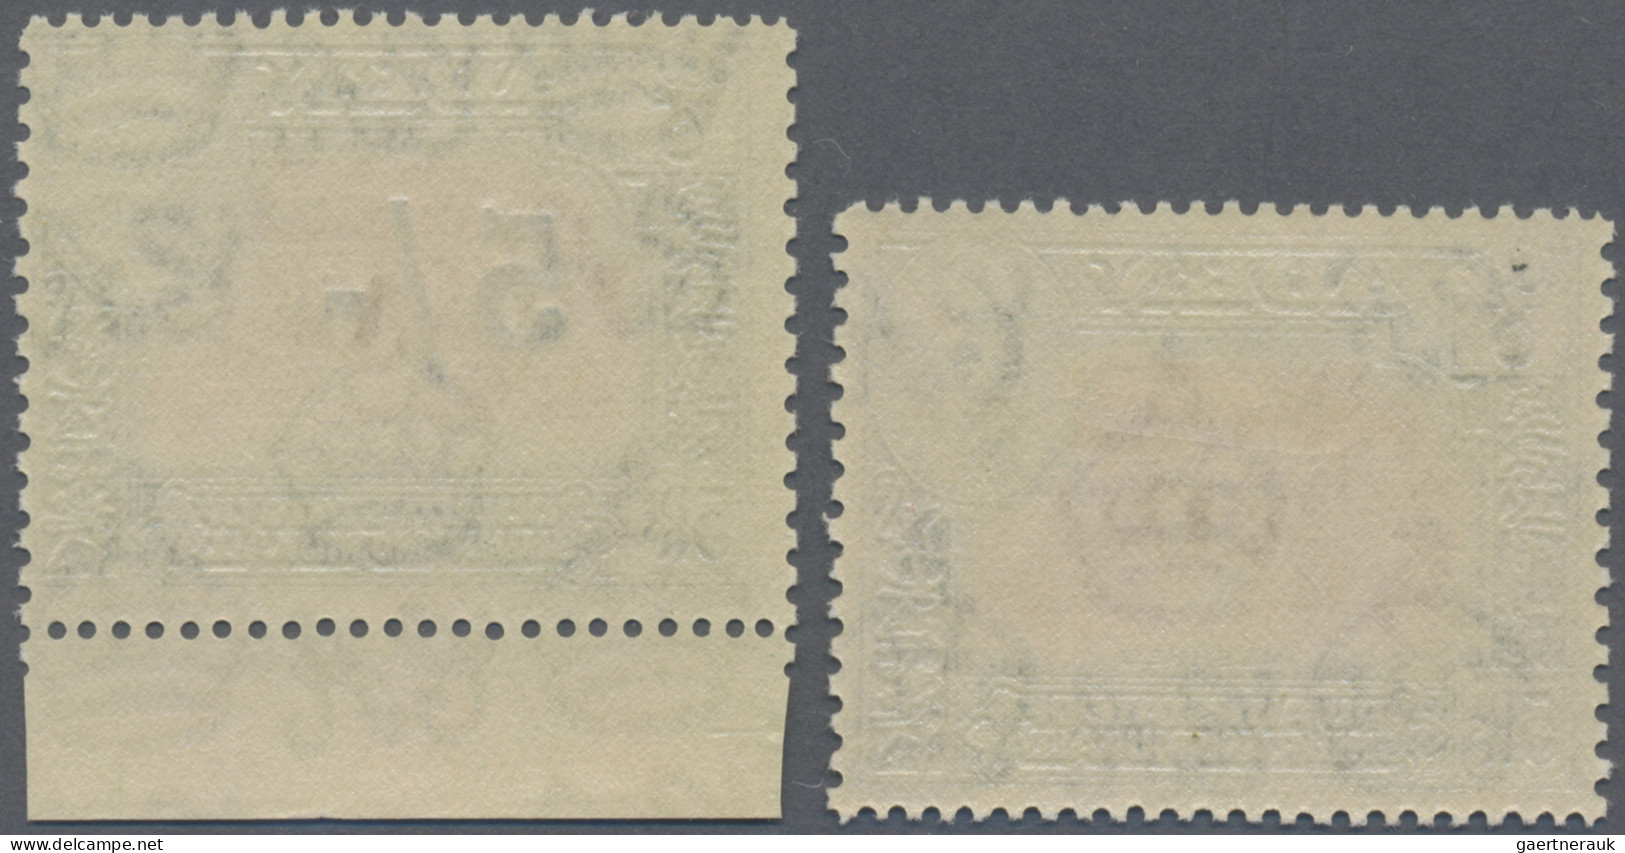 Aden - Qu'aiti State In Hadhramaut: 1942/1951 Variety "EXTRA WALL" On 1942 5r. A - Yémen